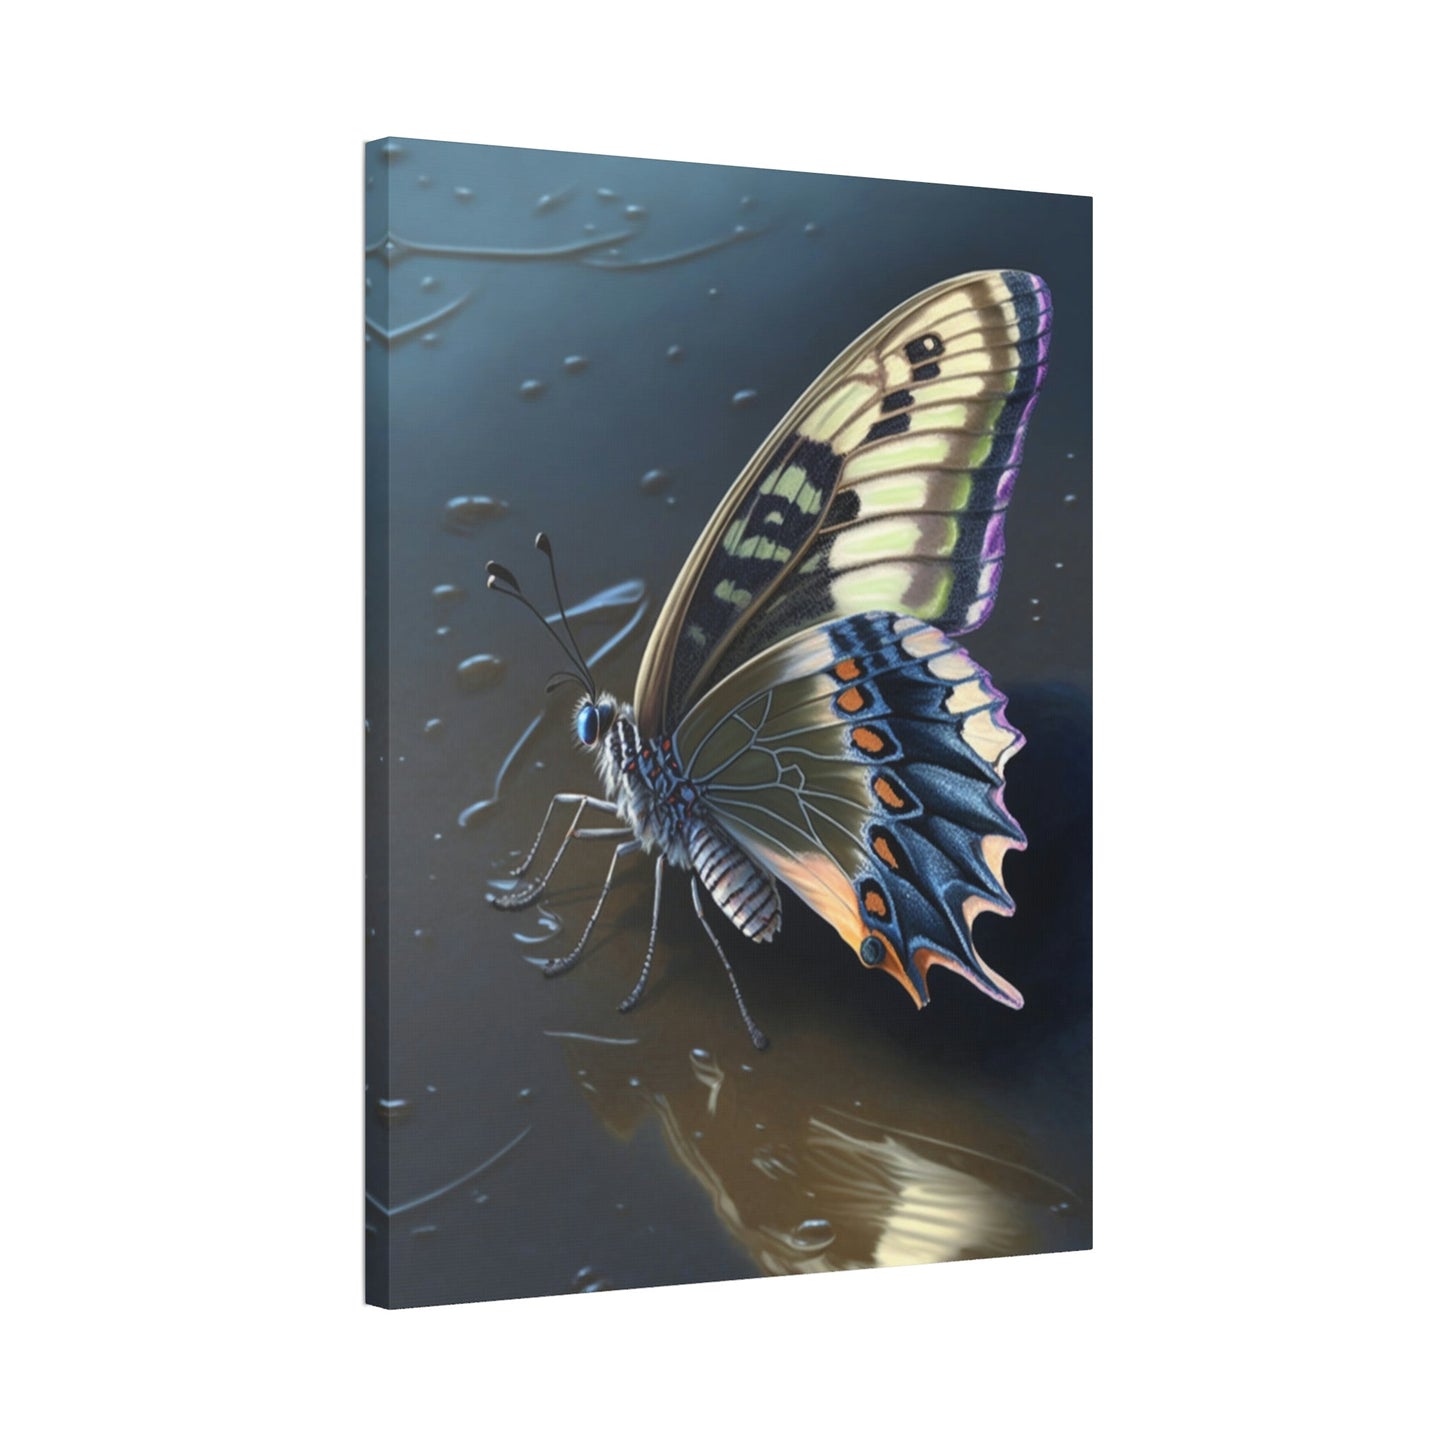 Fluttering Wings: Natural Canvas & Poster Print of Colorful Butterflies